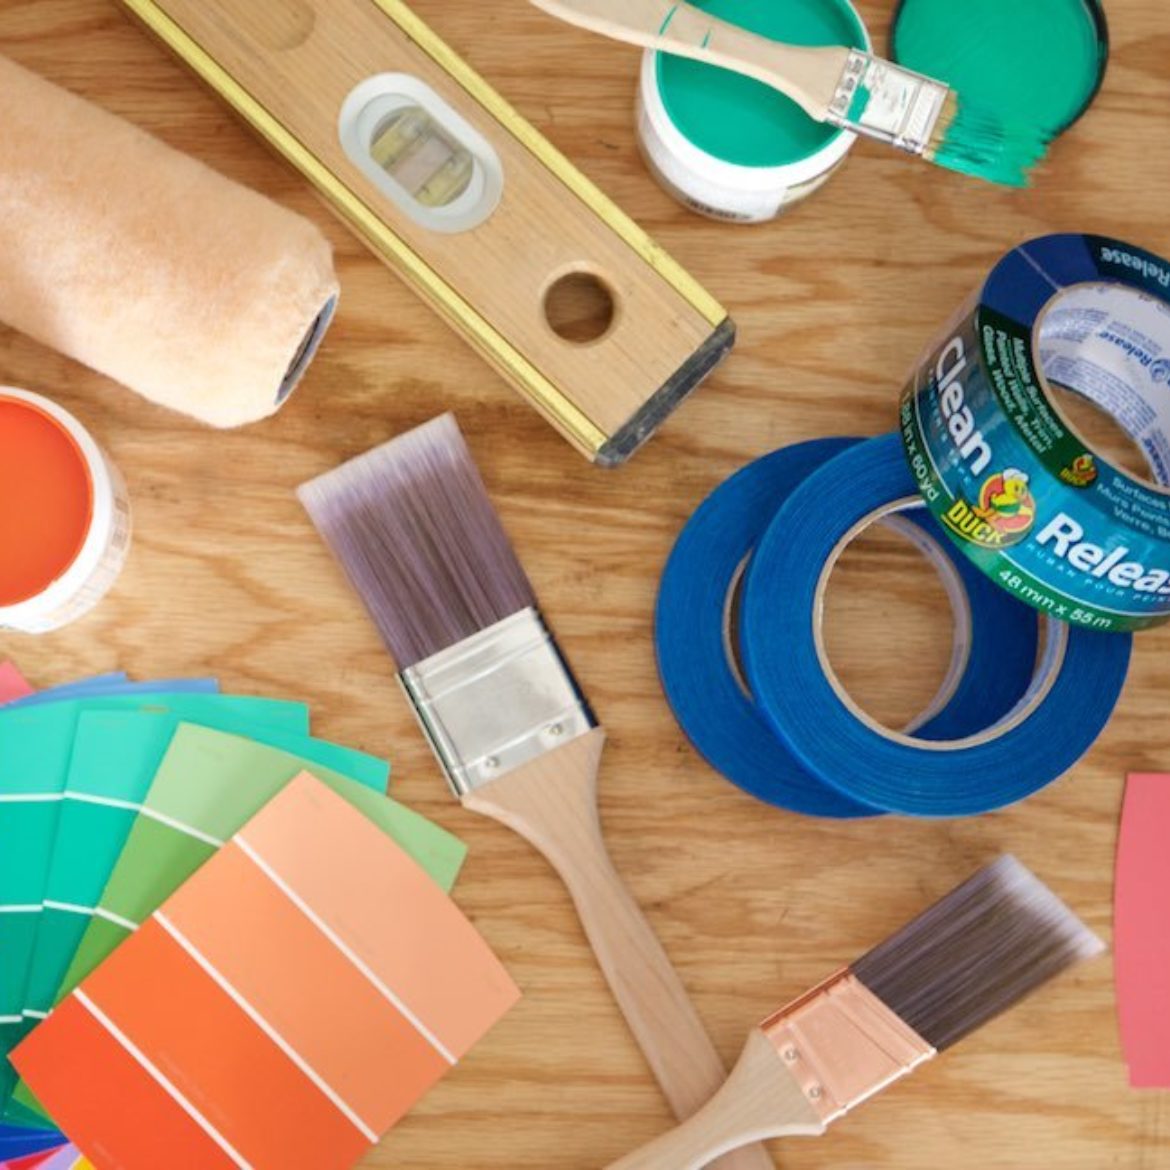 An assortment of brushes, rollers and paint swatches.